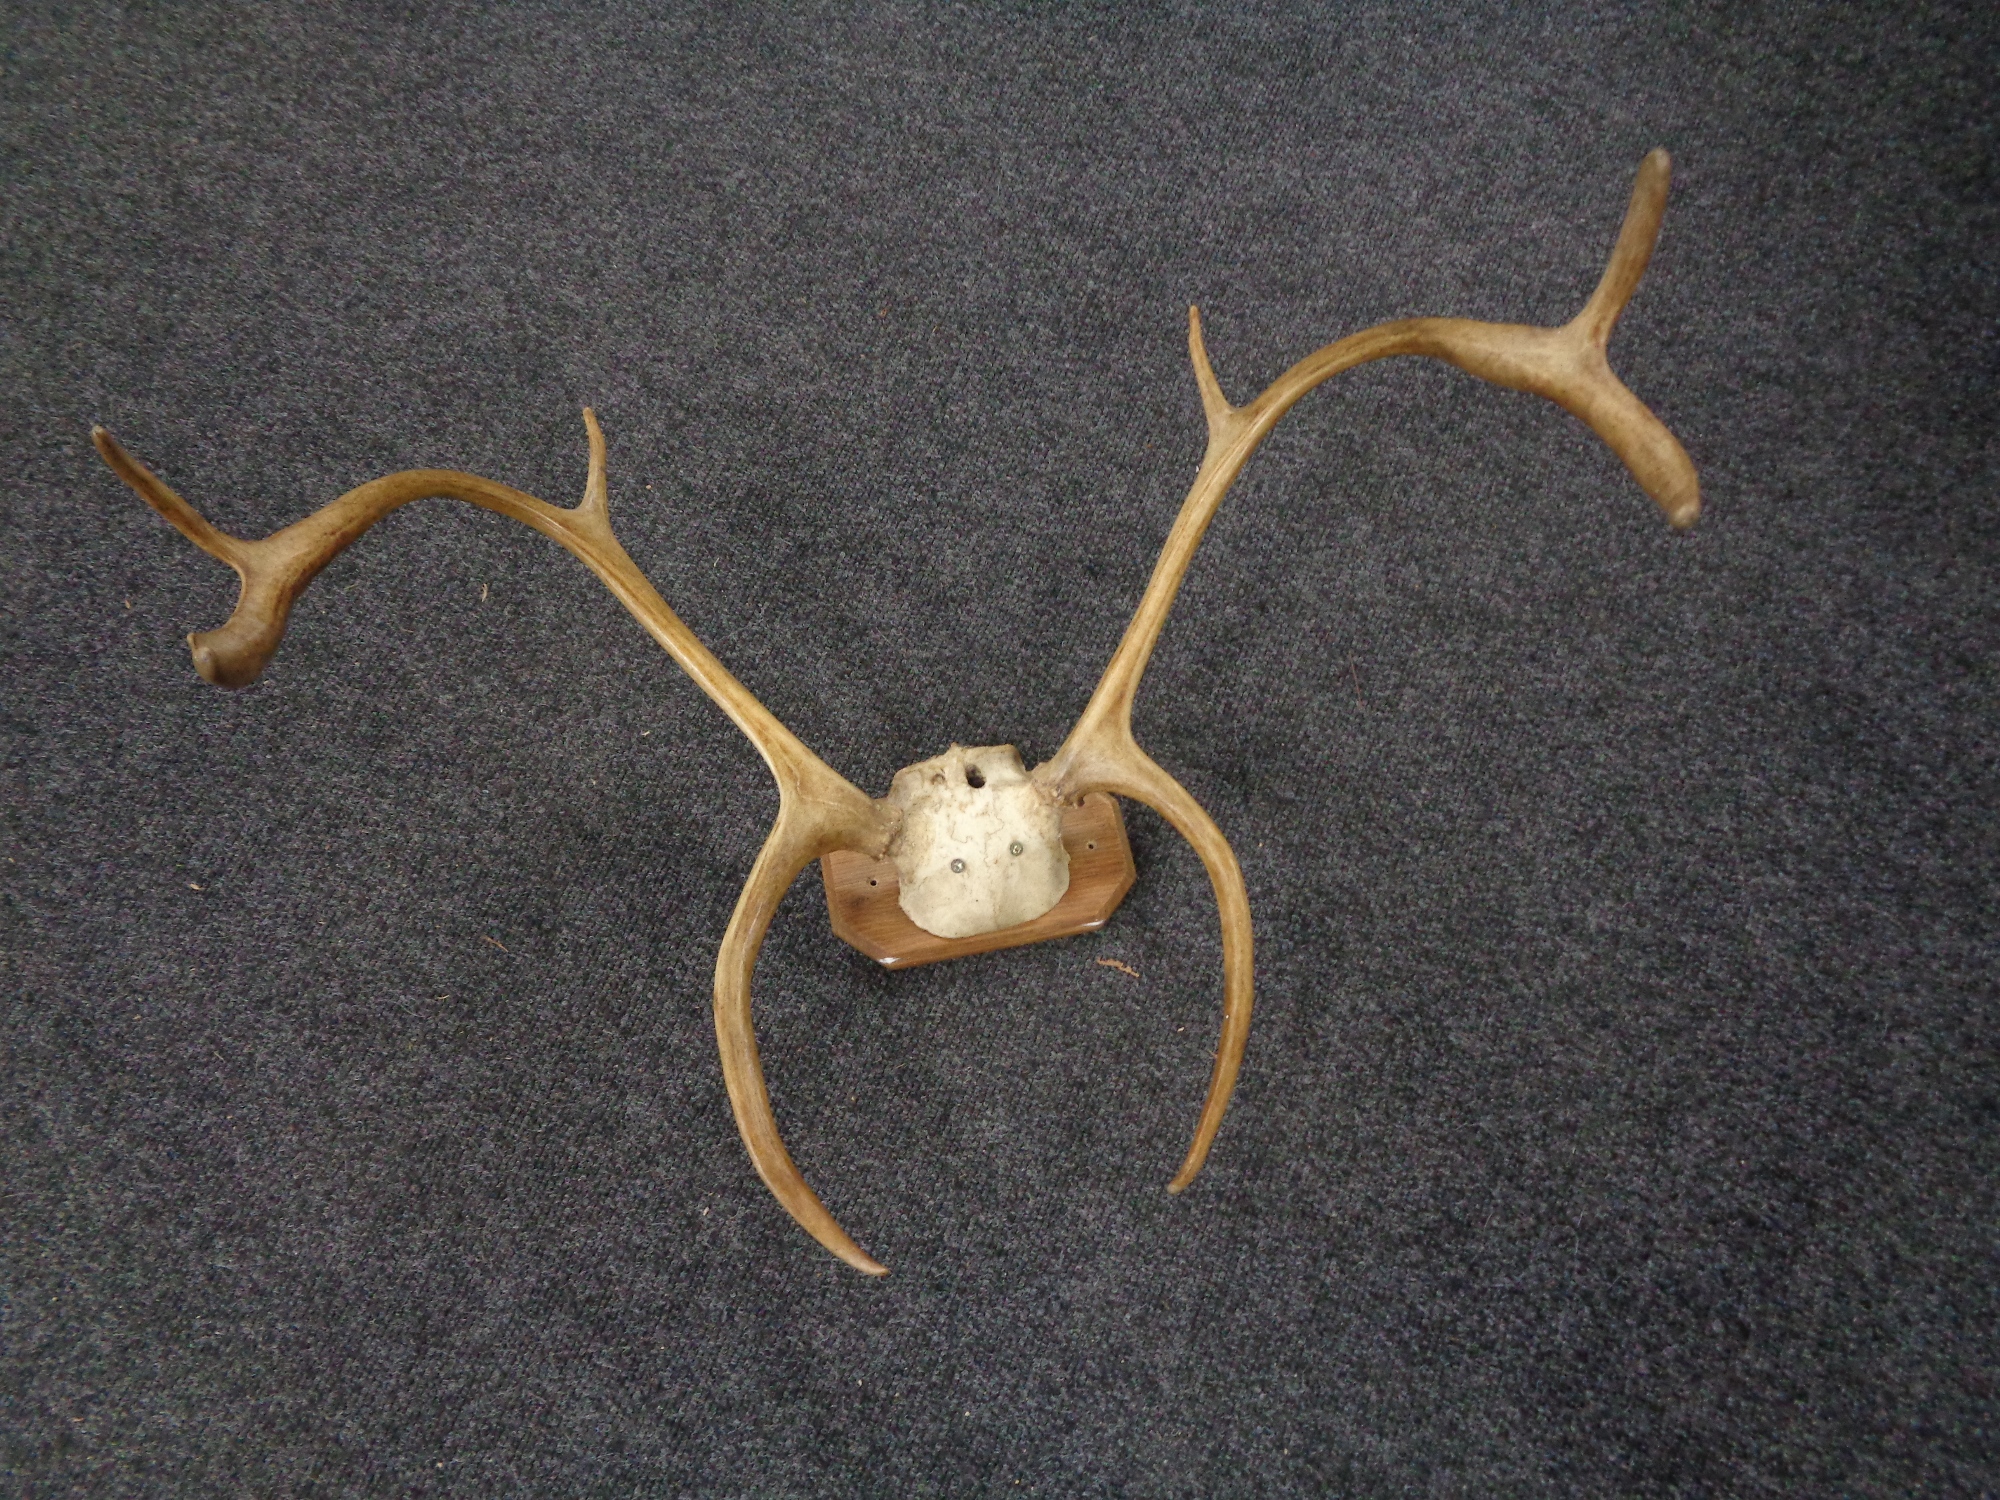 A set of deer antlers mounted on a board.